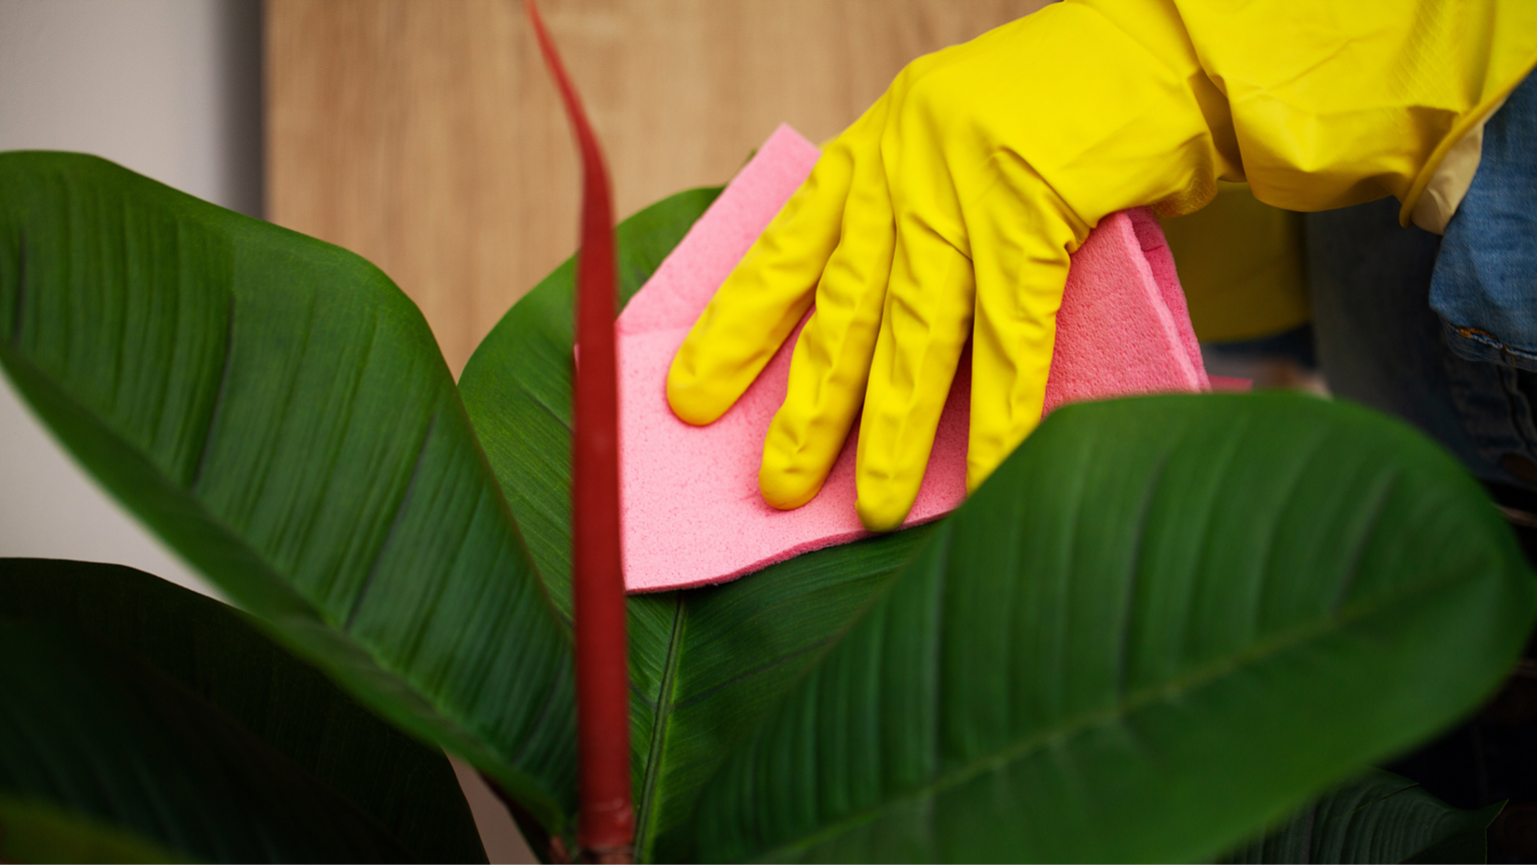 Green Cleaning Services in Overland Park